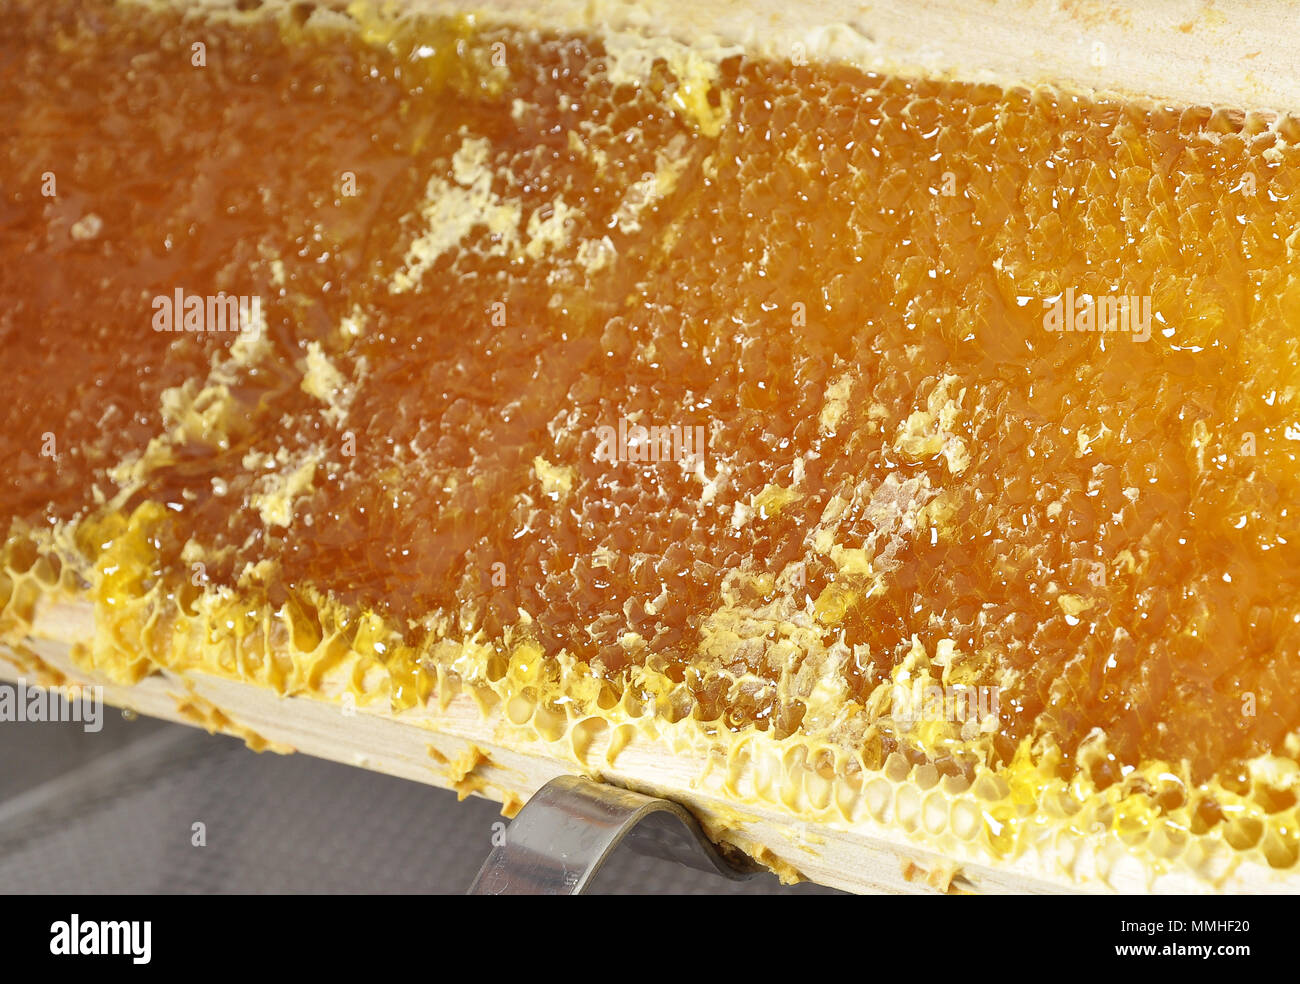 Uncapped honeycomb on extraction holder Stock Photo